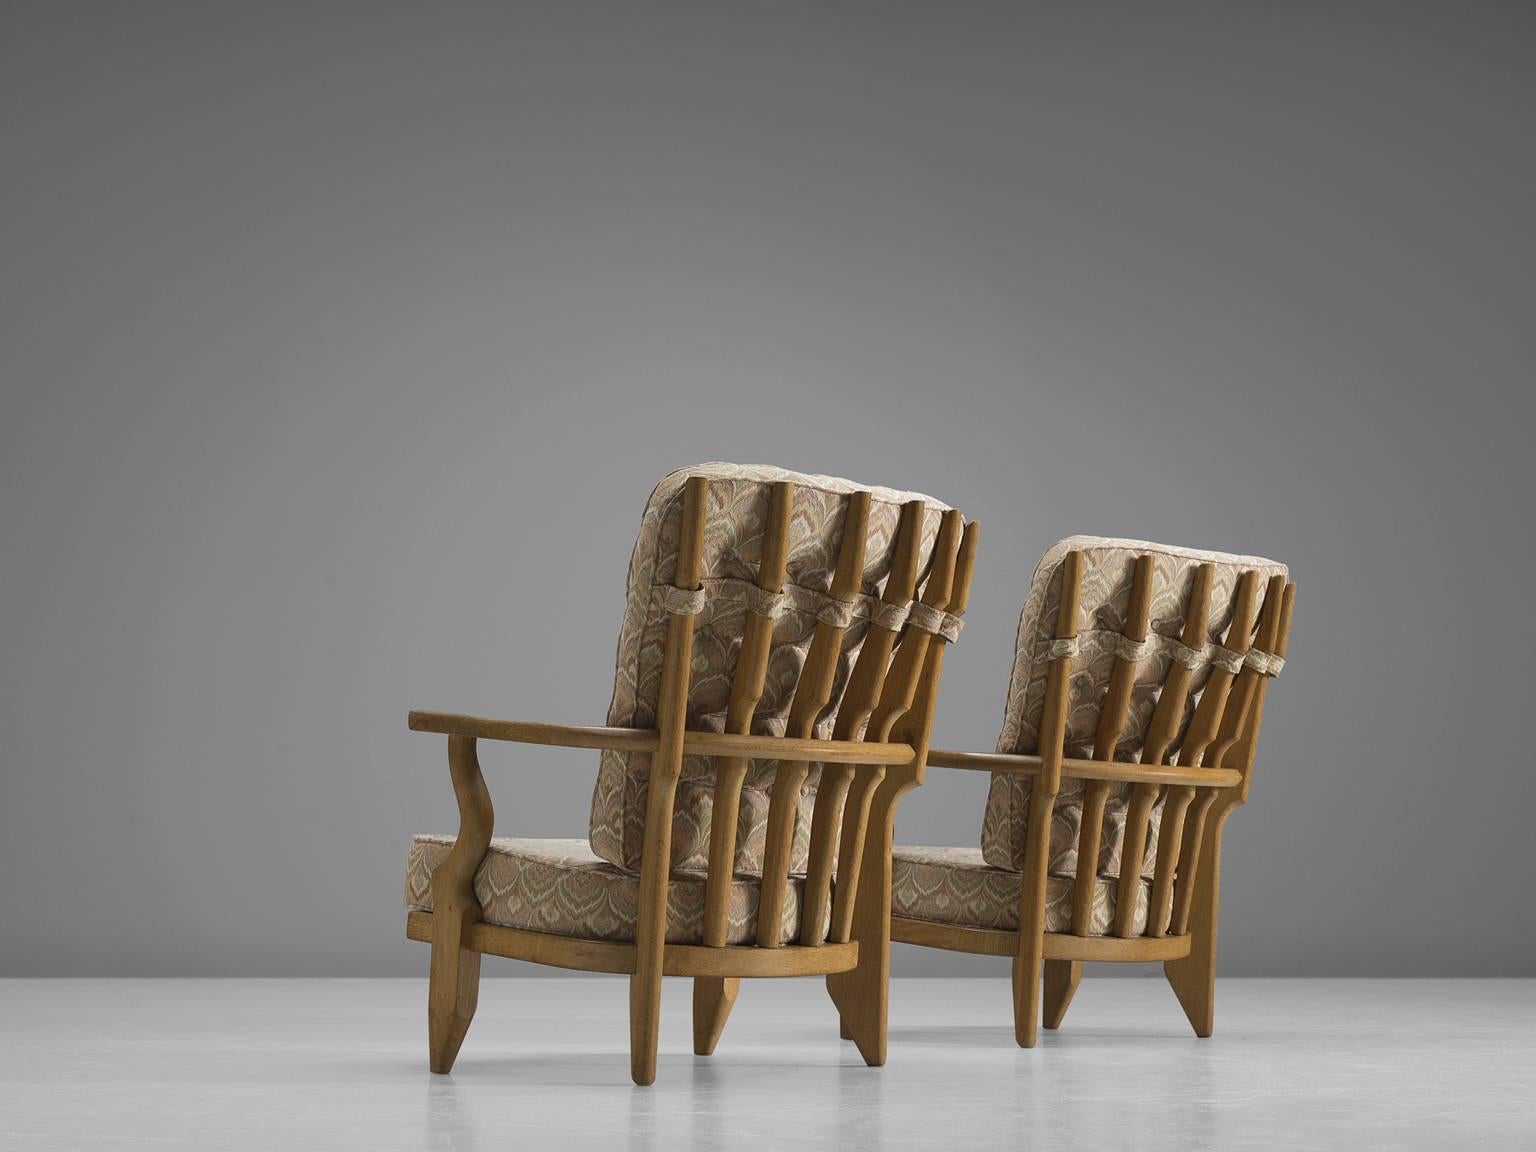 Lounge chairs oak, floral beige upholstery, oak, by Guillerme et Chambron, France, 1960s. 

Guillerme and Chambron are known for their high quality solid oak furniture, from which this is another great example. These chairs have an interesting,